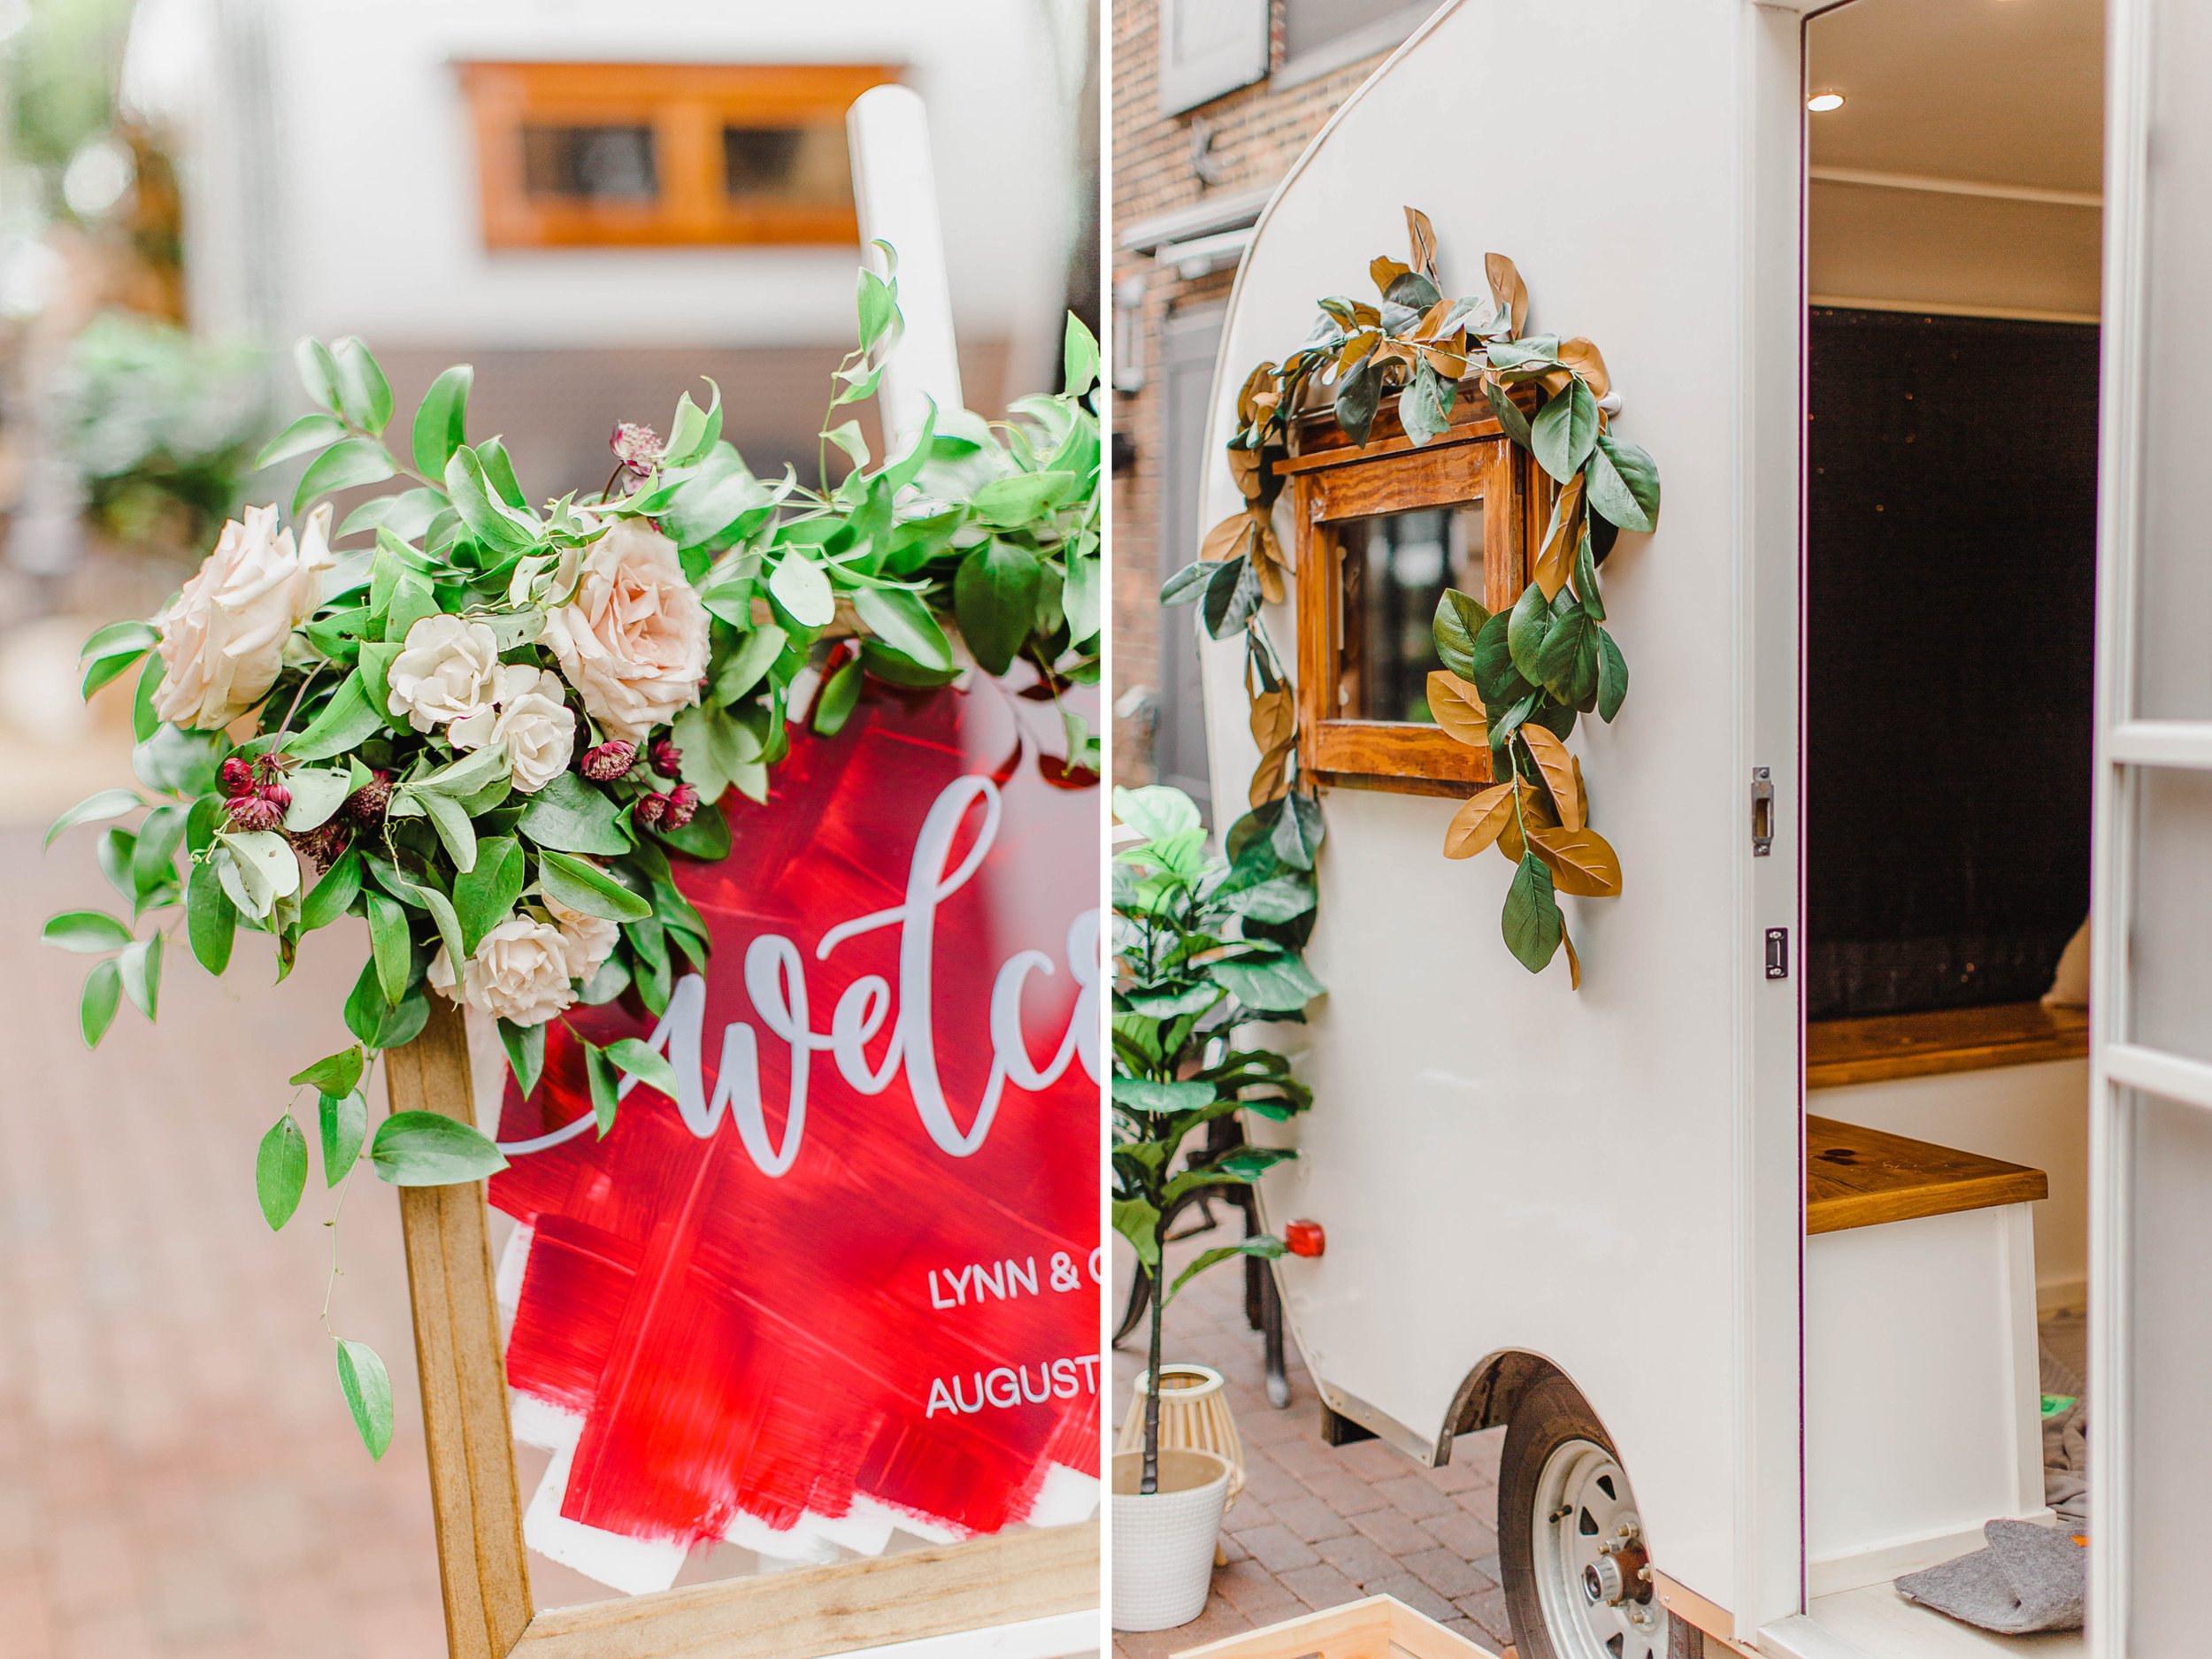  Virtue feed and grain wedding with vintage photo camper 